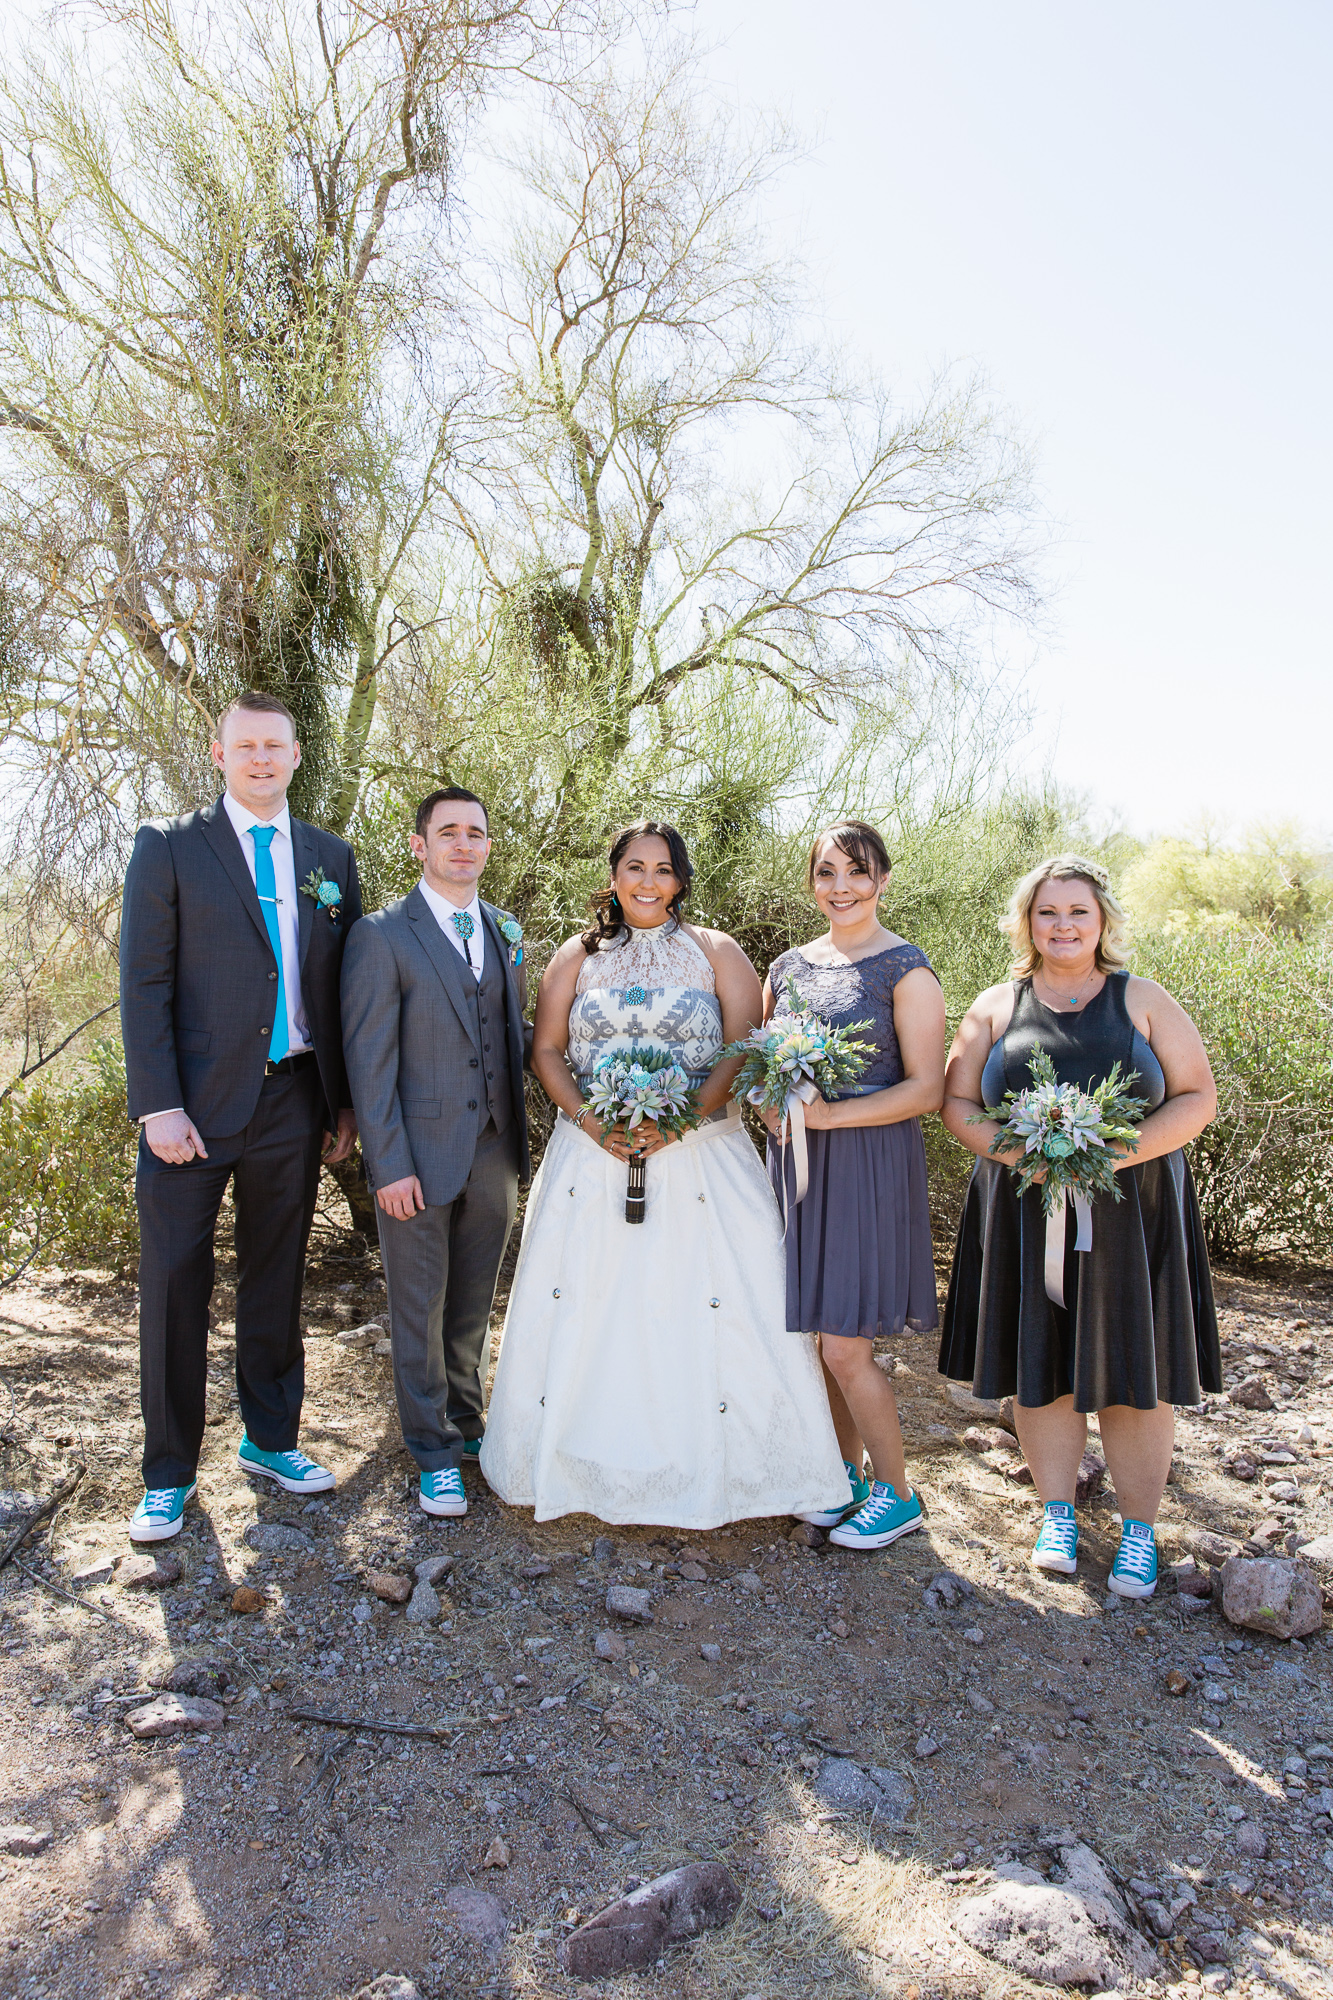 Turquoise and Grey bridal party in the Arizona desert of Lost Dutchman State Park by wedding photographer PMA Photography.